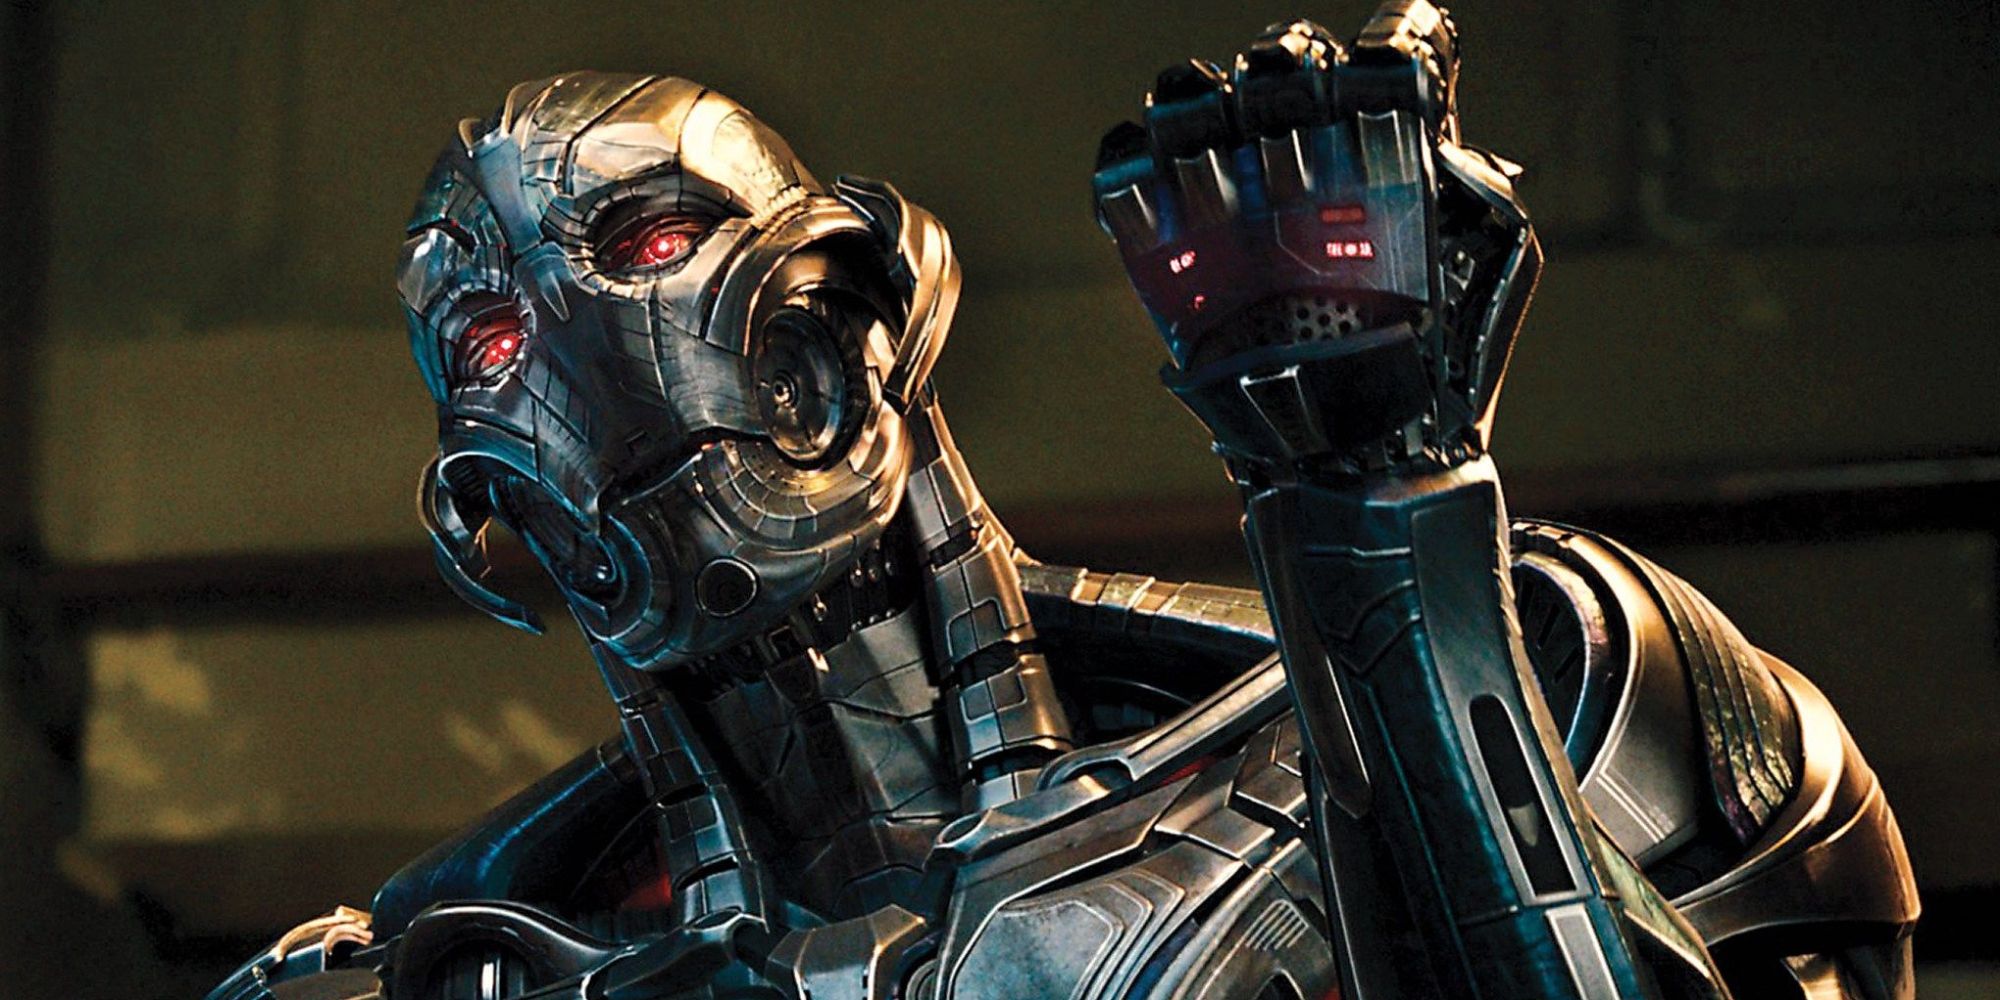 Ultron from Age of Ultron